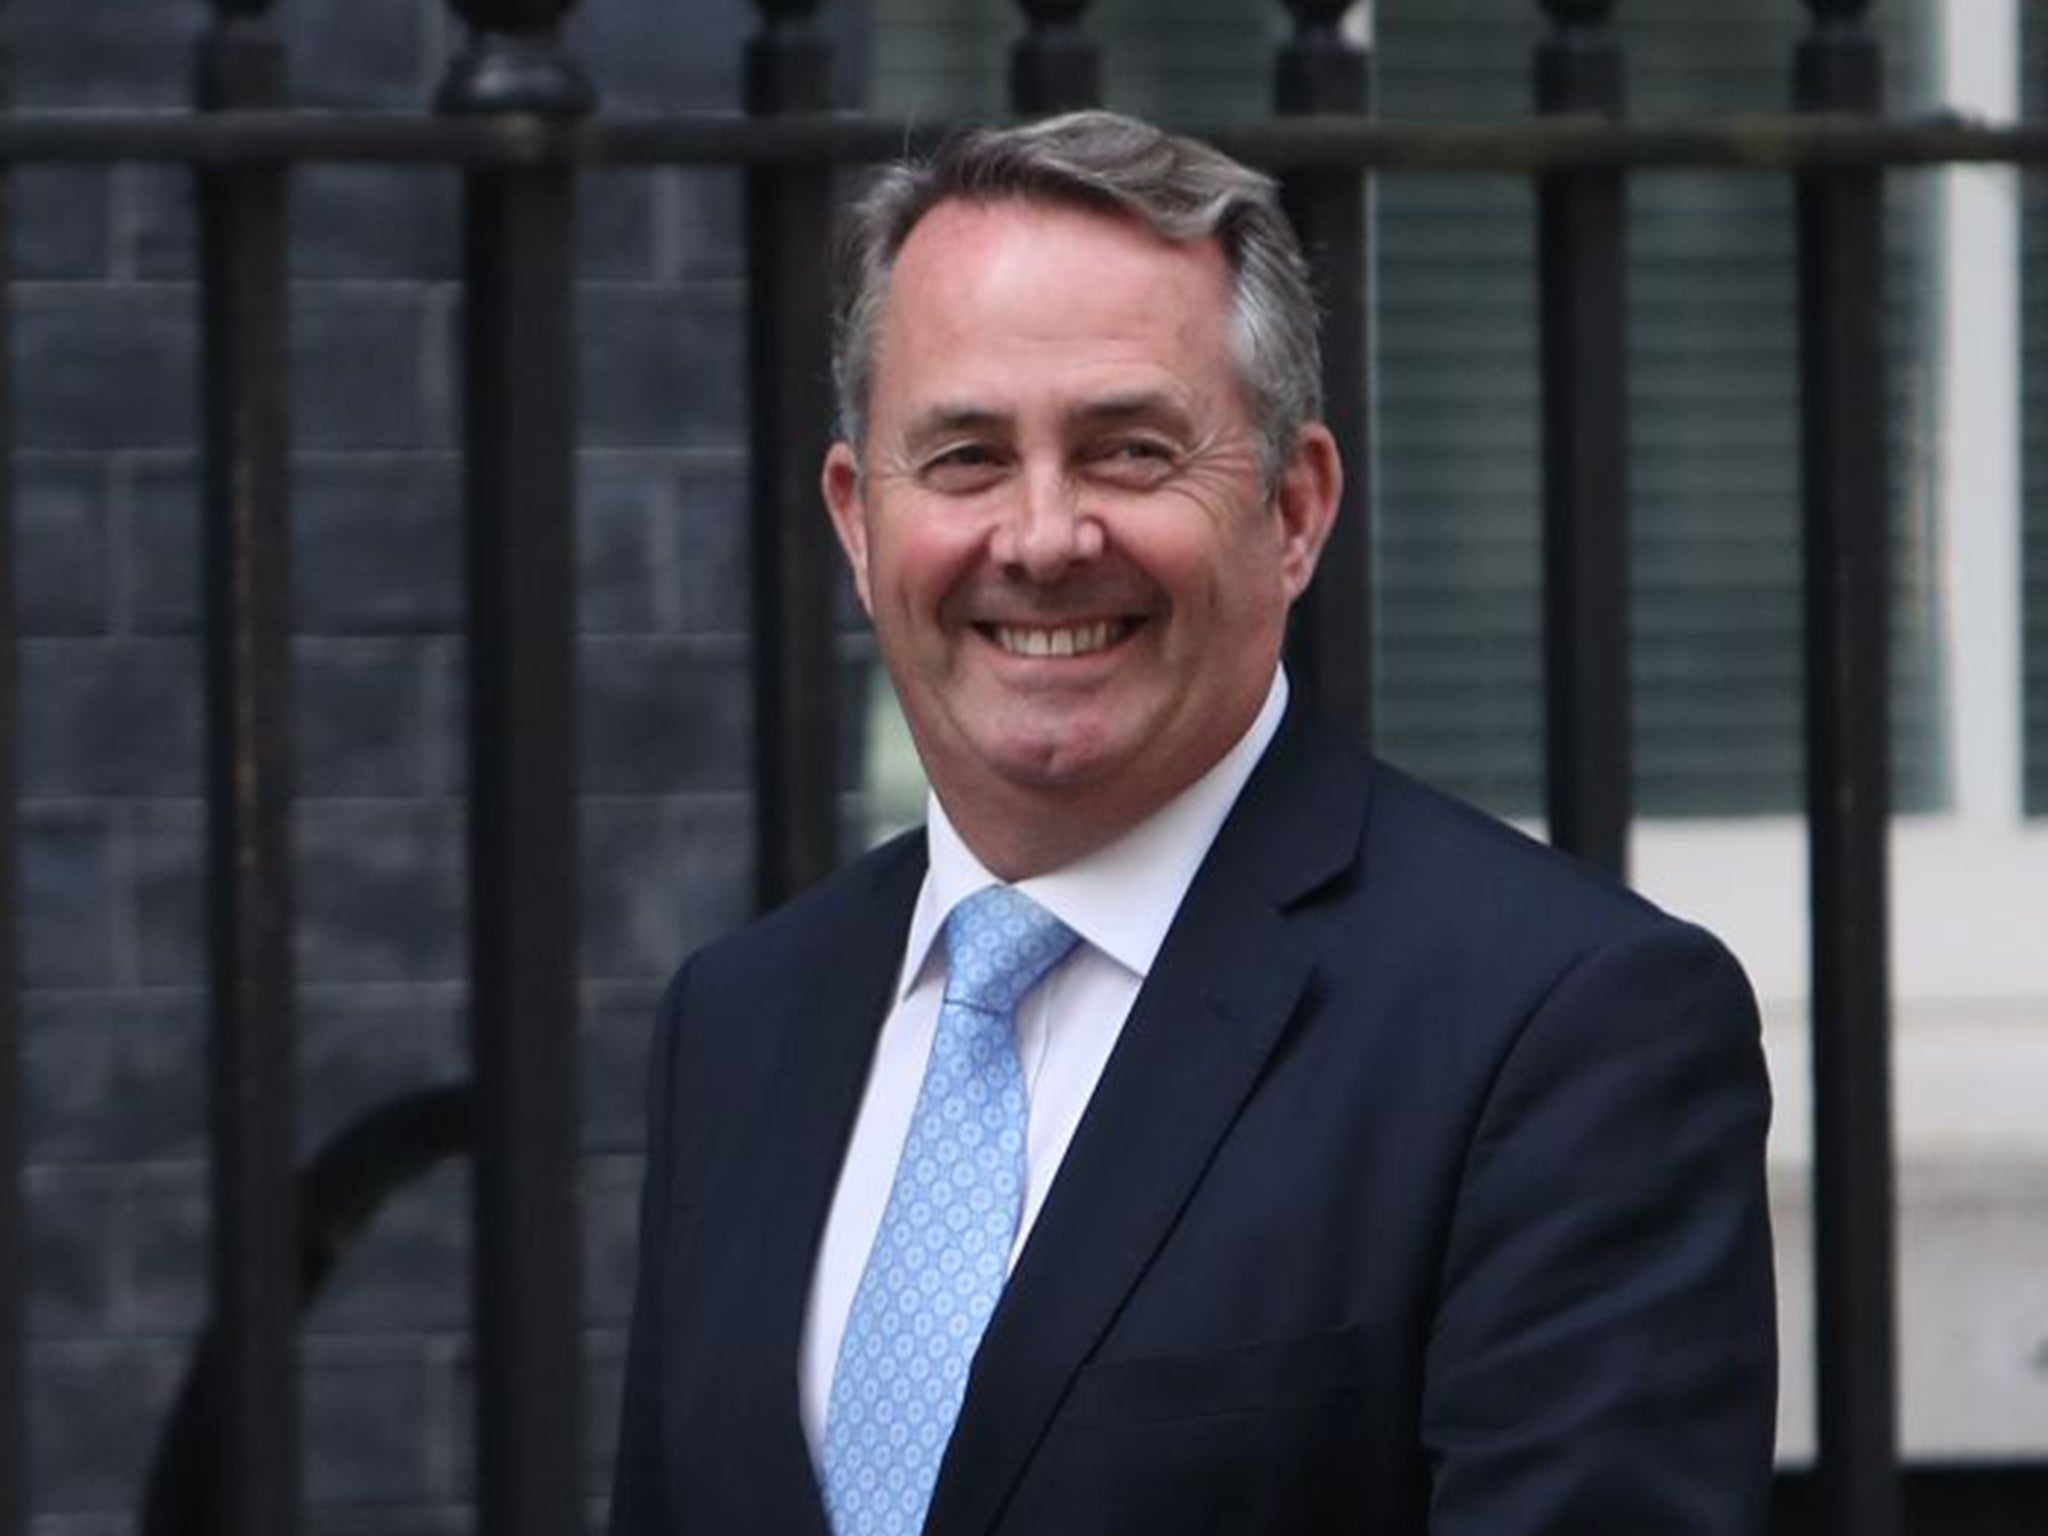 British businessmen prefer ‘golf on a Friday afternoon’ to boosting the country’s prosperity, Liam Fox has said